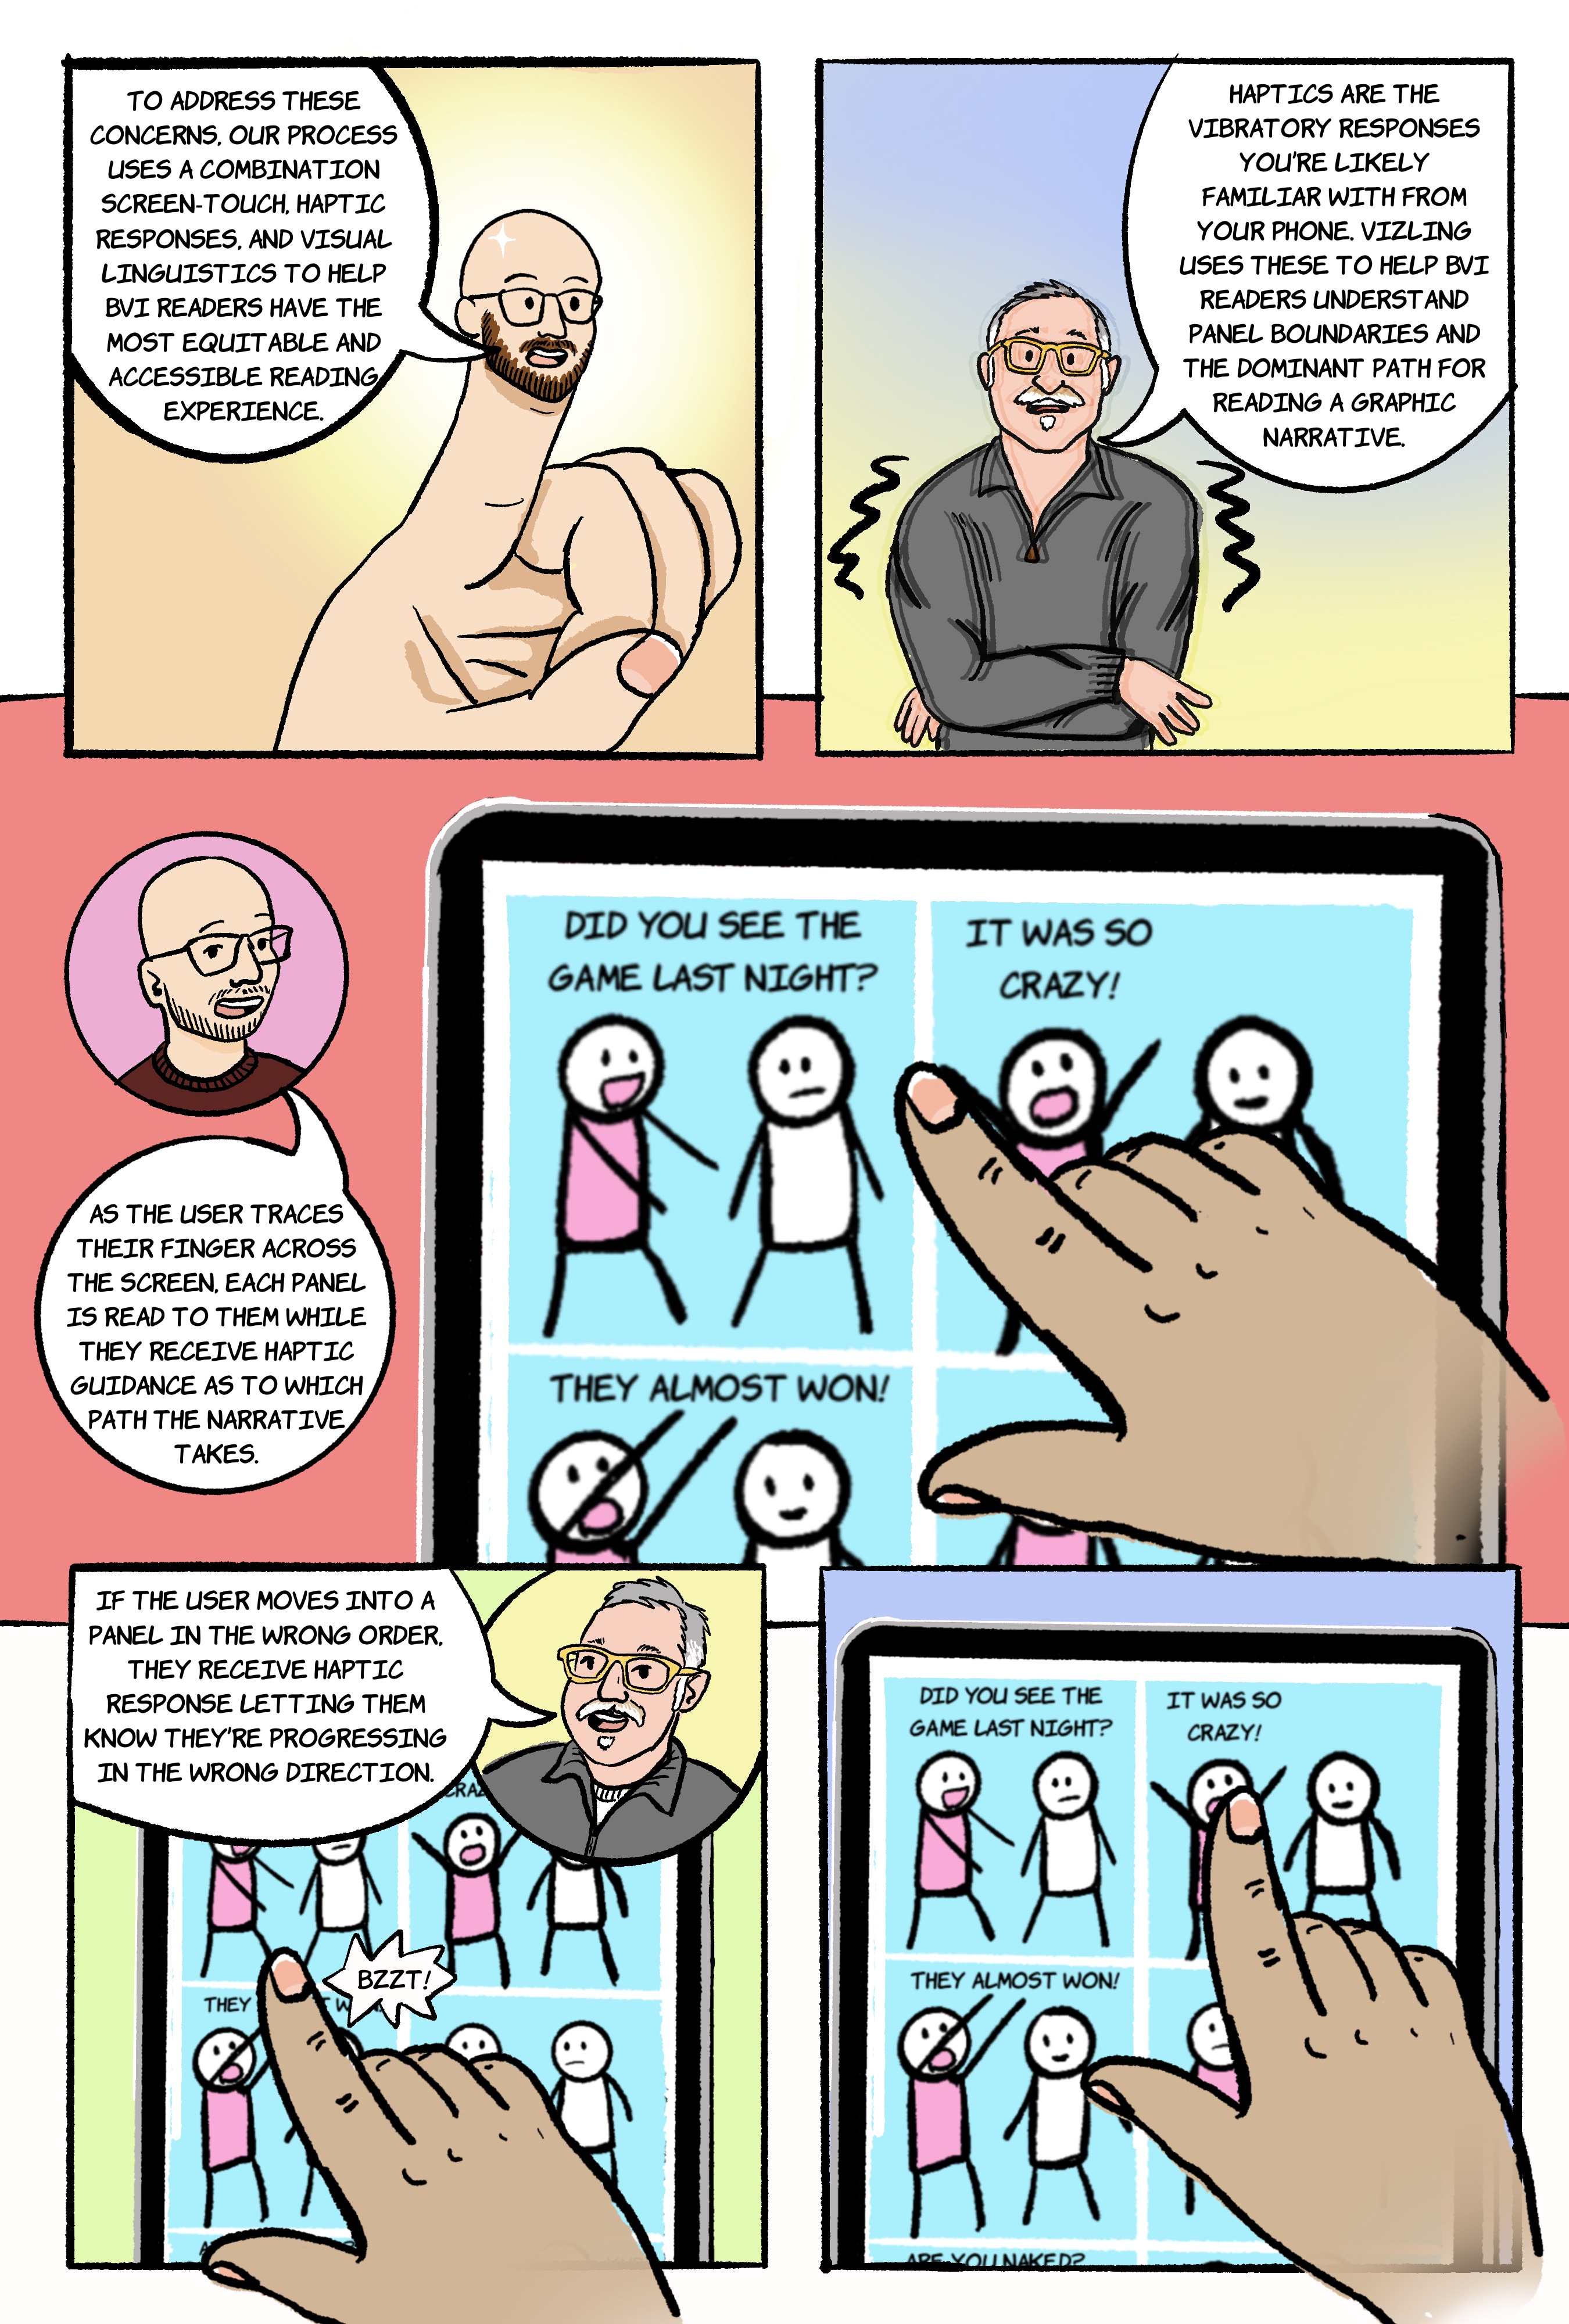 Page 3 of the comic. Text version is presented alongside the comic.